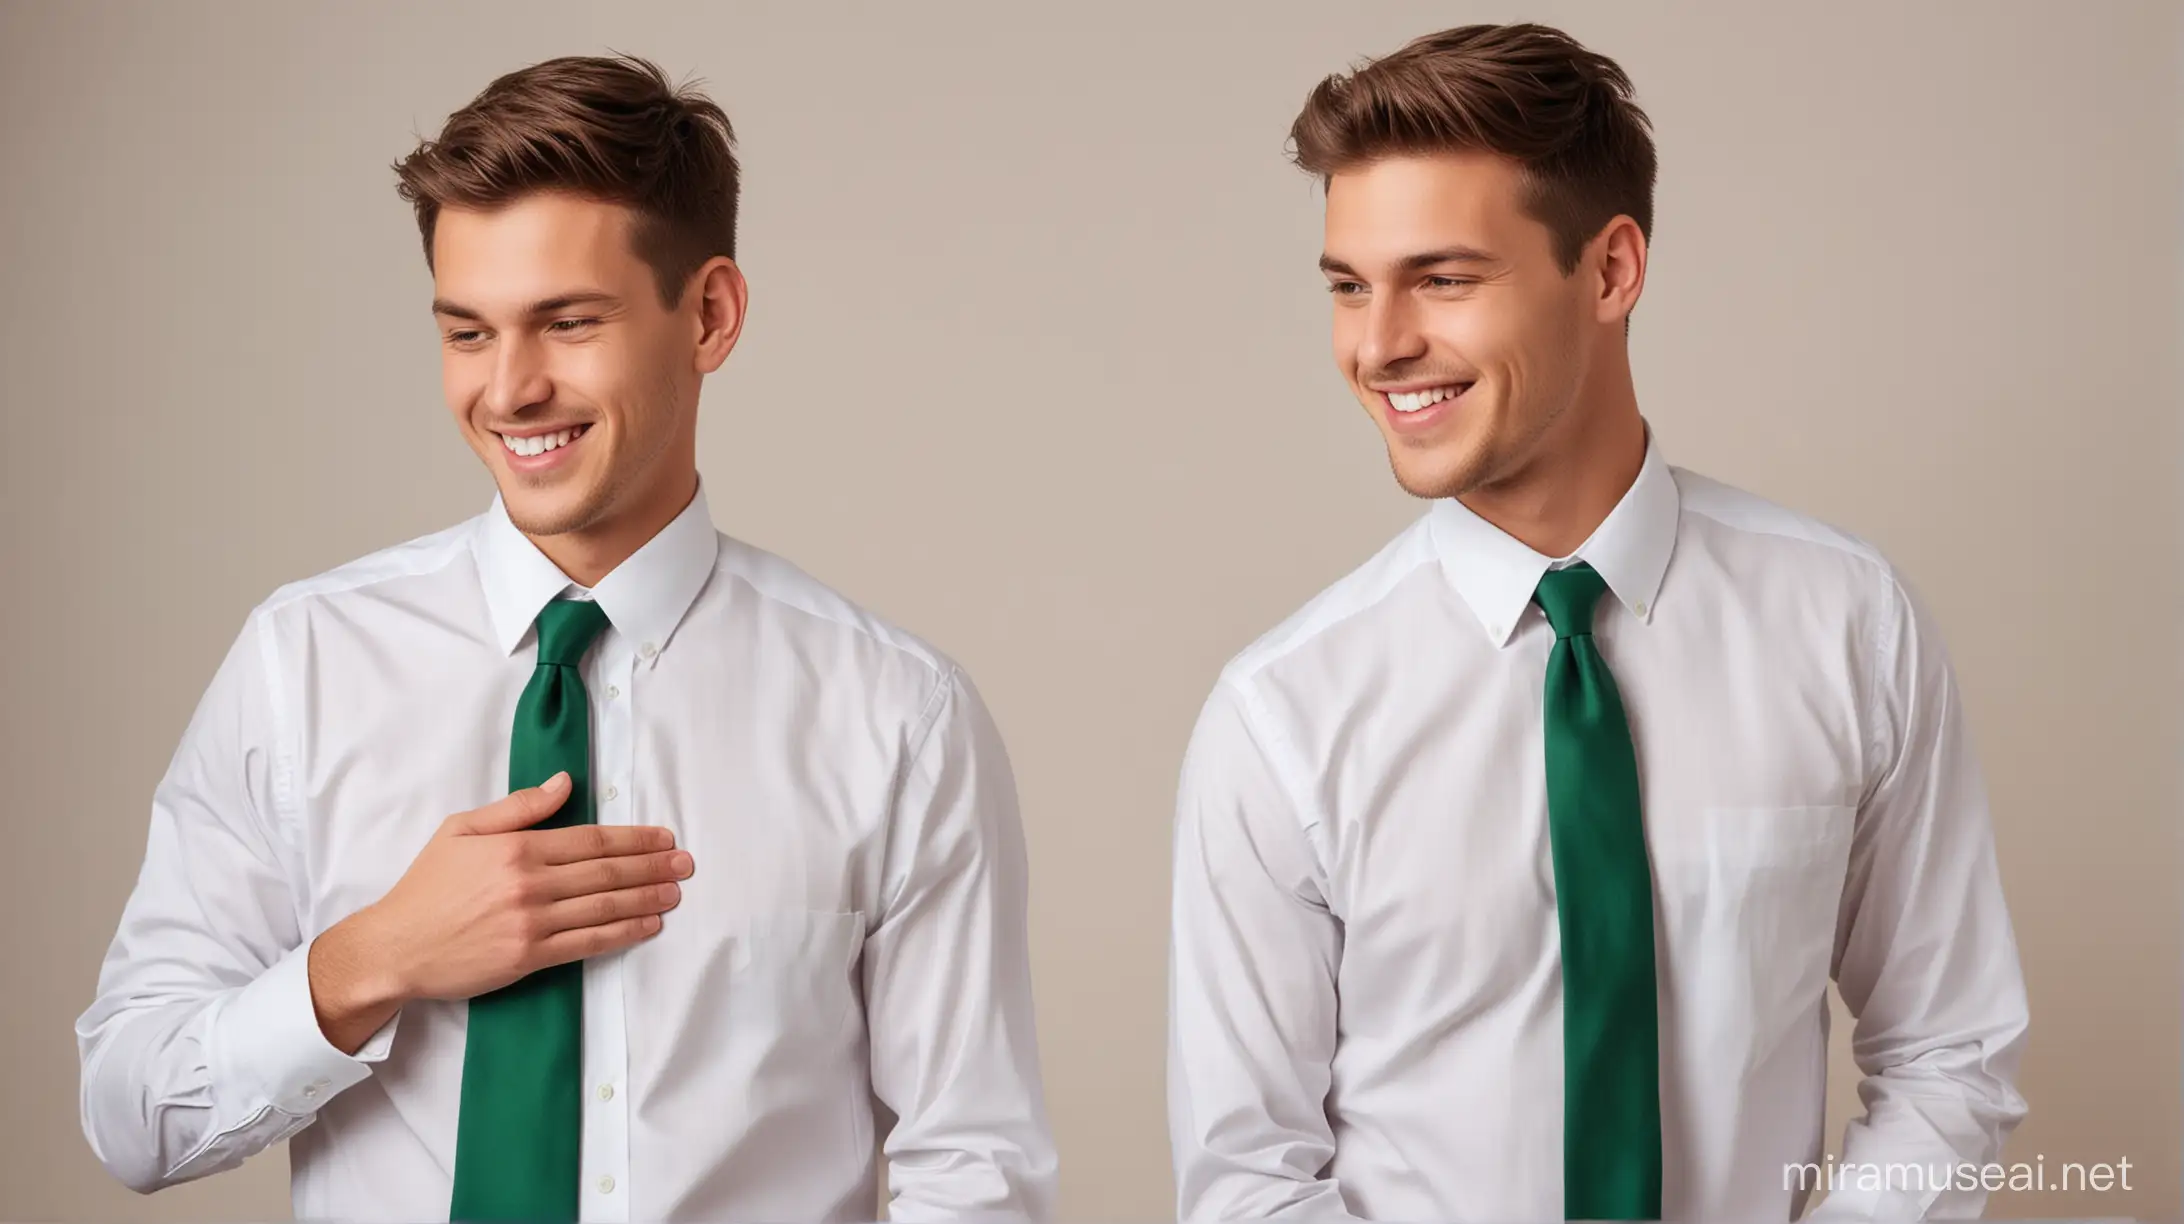 two young men wearing crisp white dress shirts and green ties, one stood behind the other giving a shoulder massage, smiling lovingly at each other